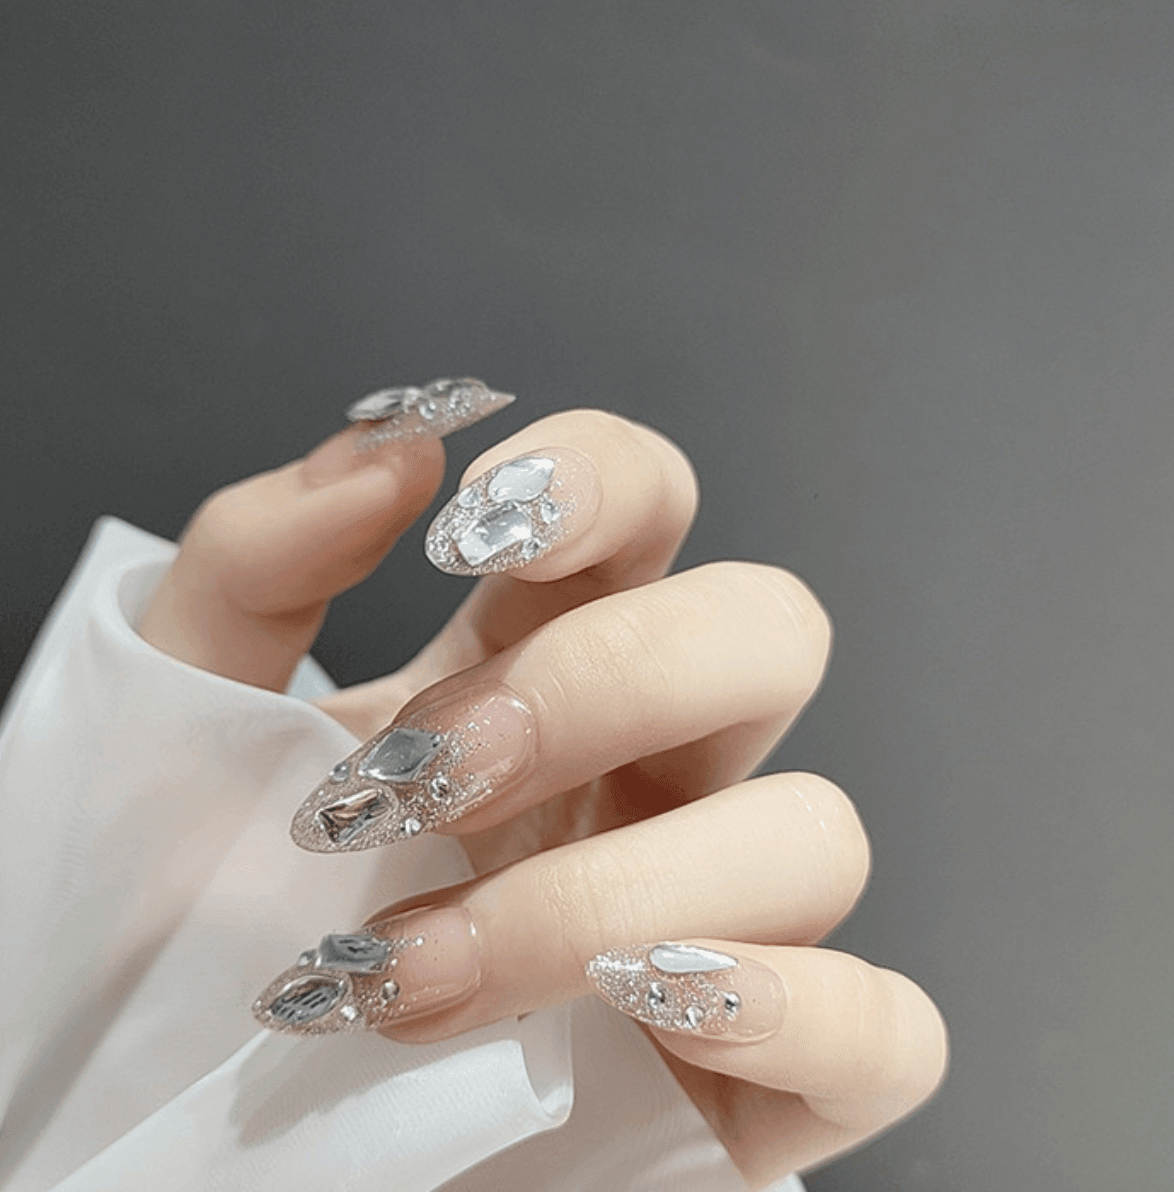 Almond Black And White False Nails Almond With French Design Detachable  Press On Manicure Tips For Fashionable Look From Caohai, $31.28 | DHgate.Com